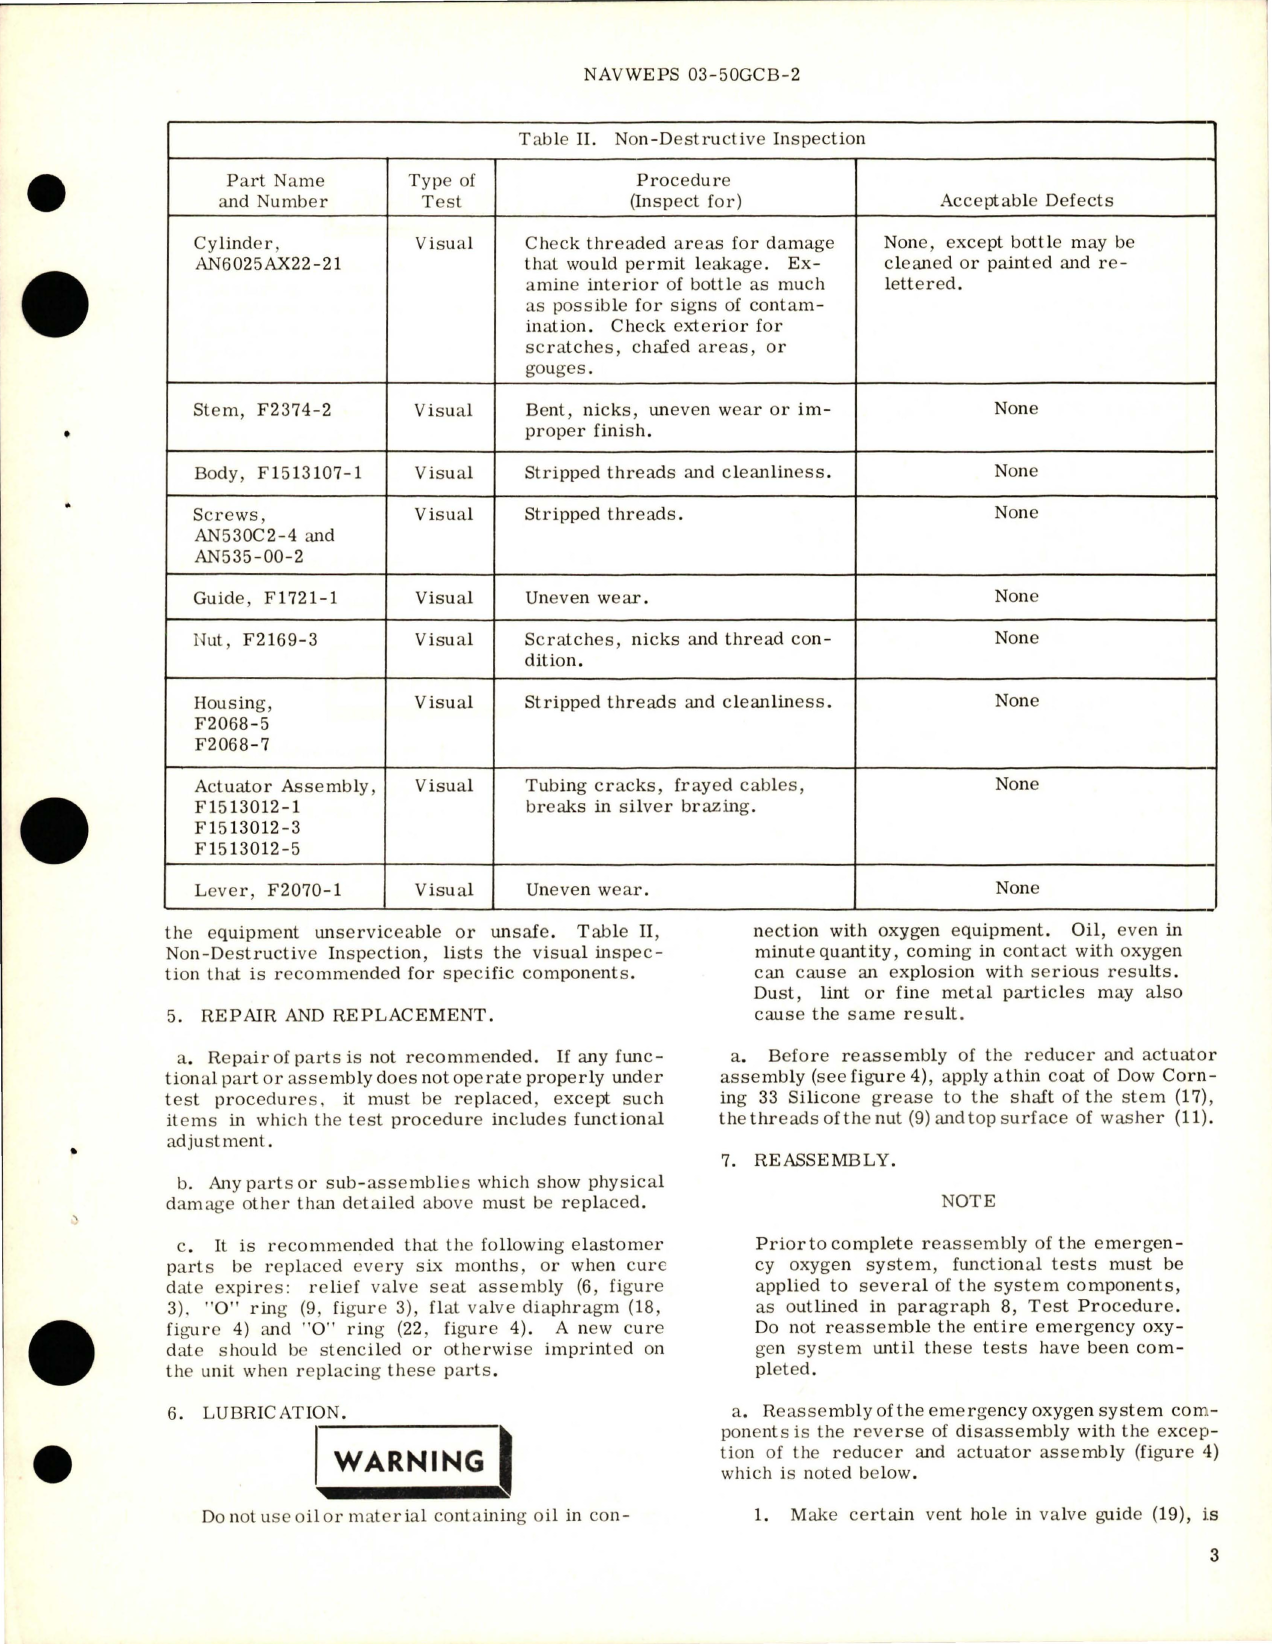 Sample page 5 from AirCorps Library document: Illustrated Parts Breakdown for Empennage De-Icer Control - Part 1035040-1